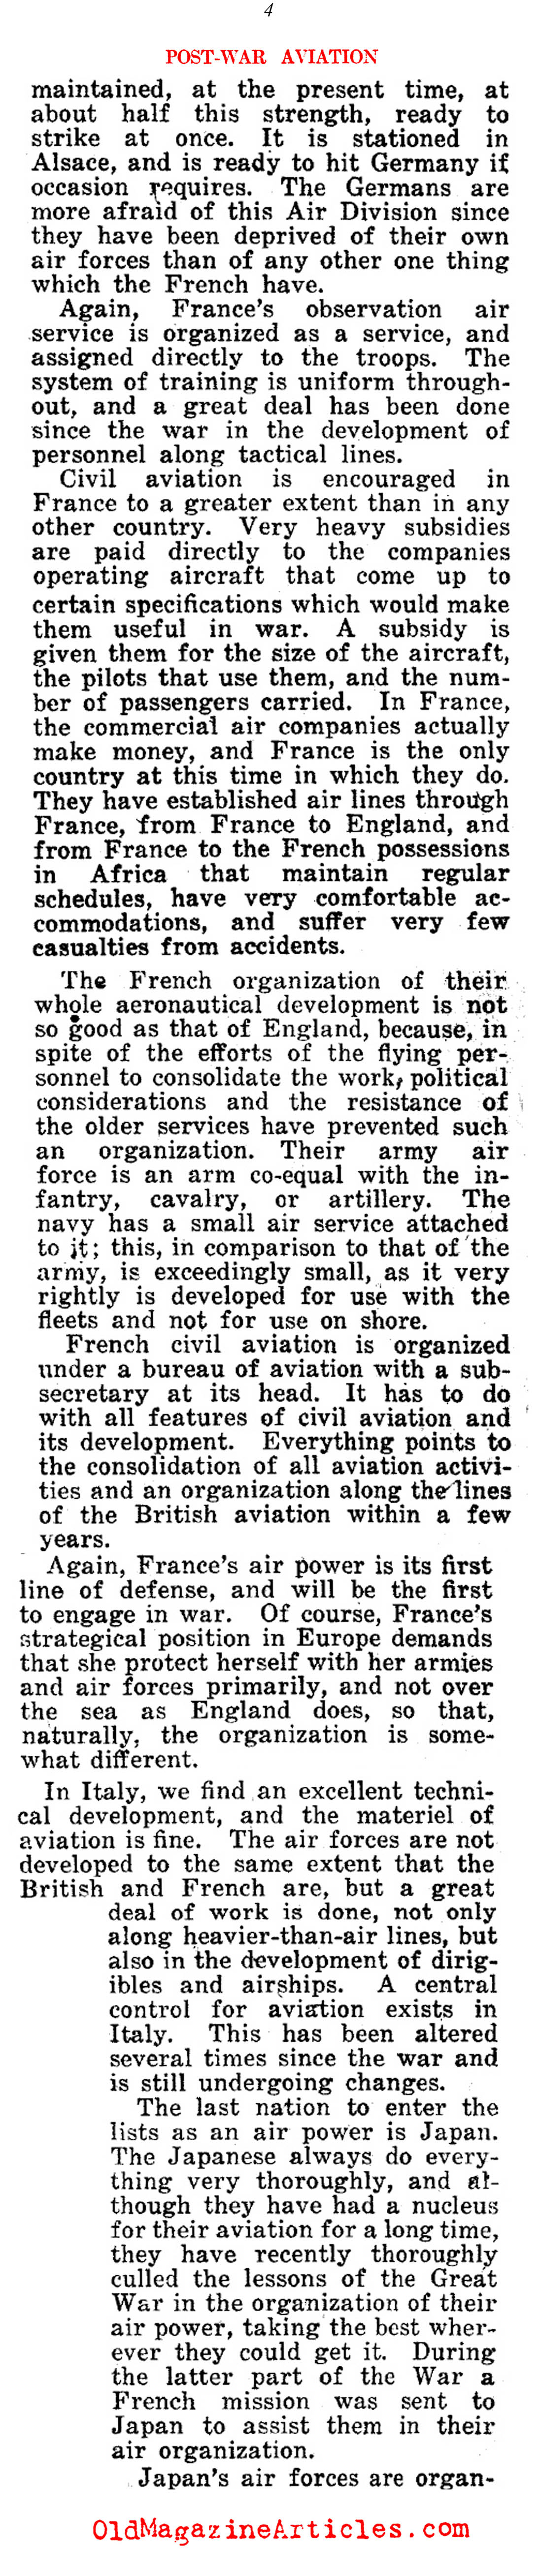 General Billy Mitchell:  Advocate of  American Airpower (American Legion Weekly,1921)